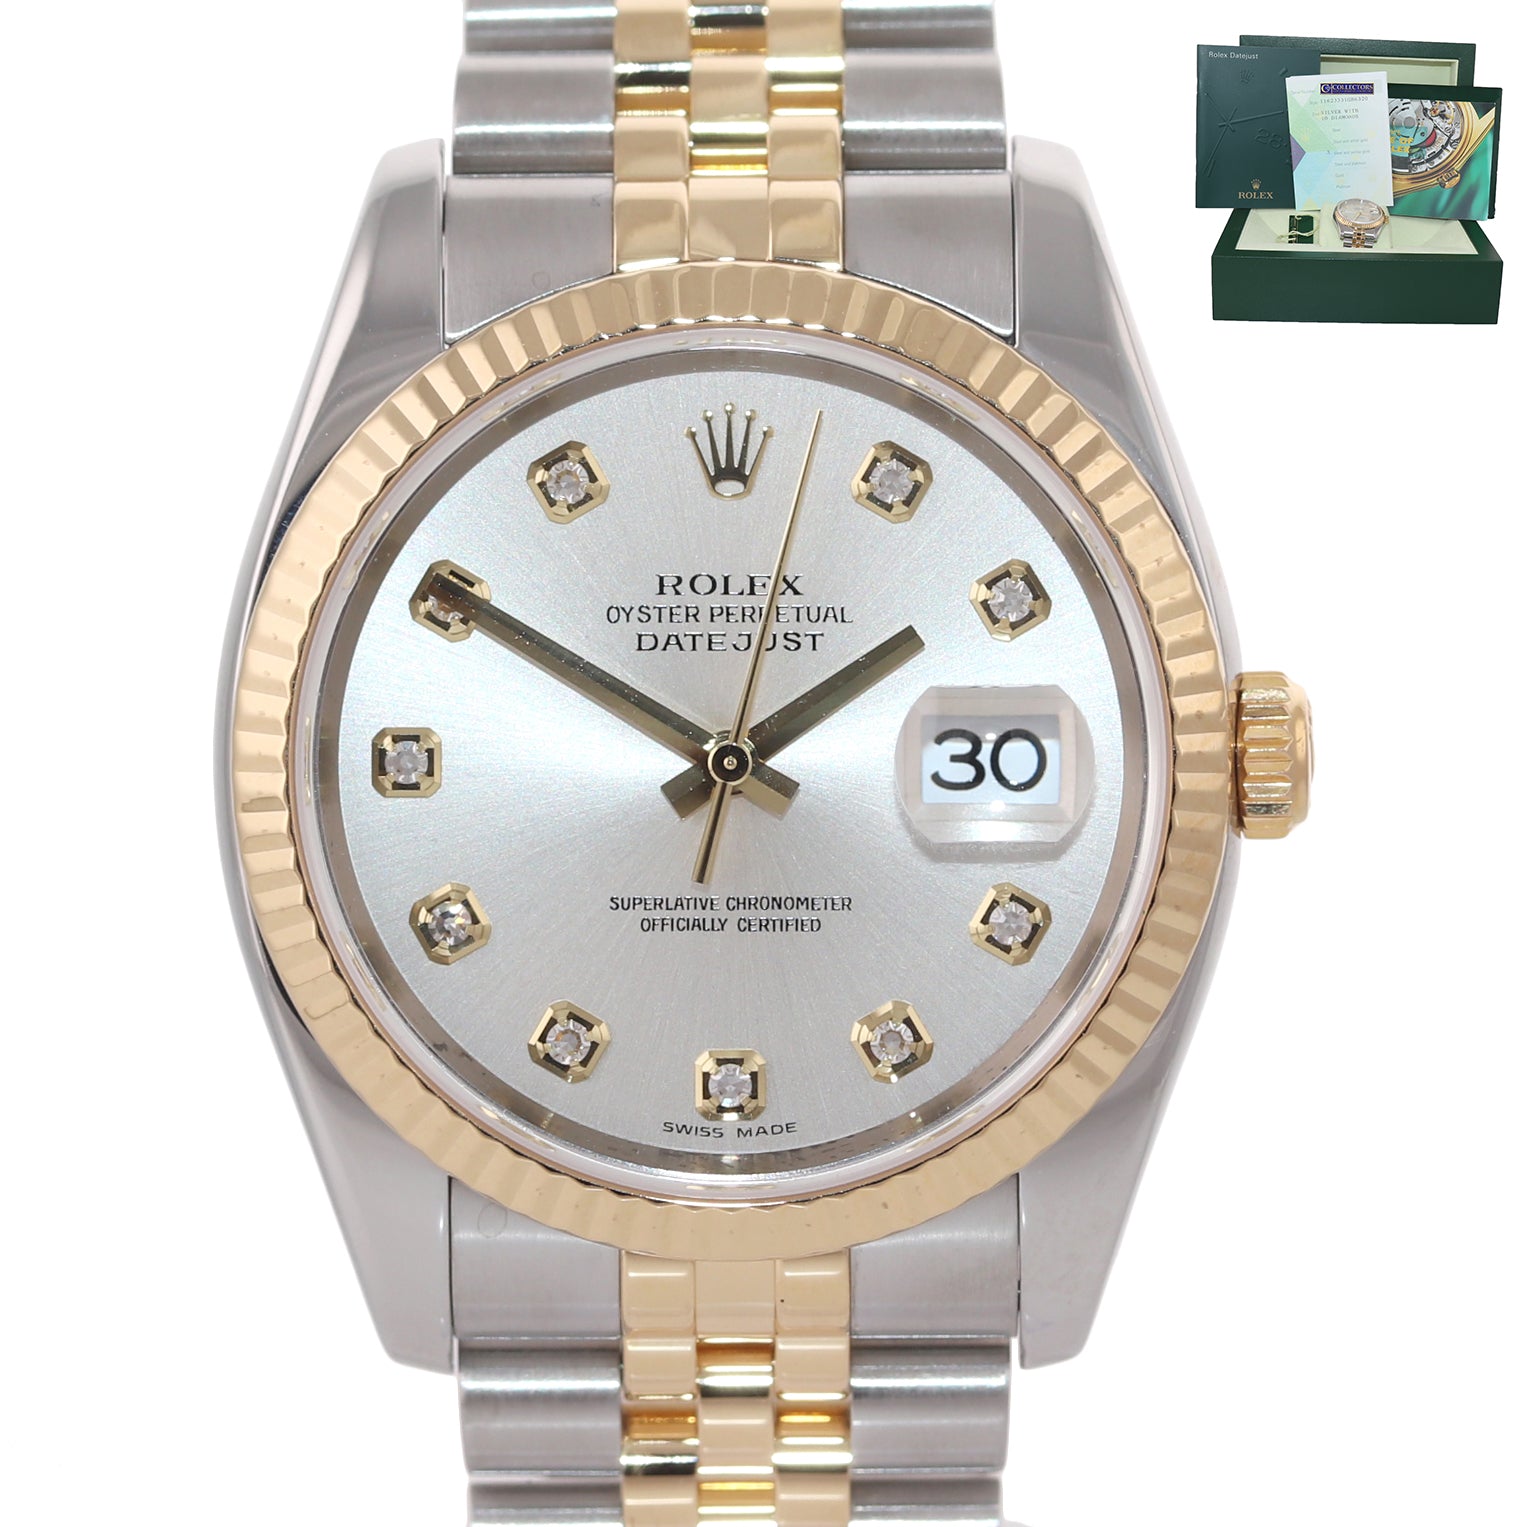 2008 PAPERS Rolex DateJust Jubilee 36mm Diamond 116233 Gold Two Tone Watch Box